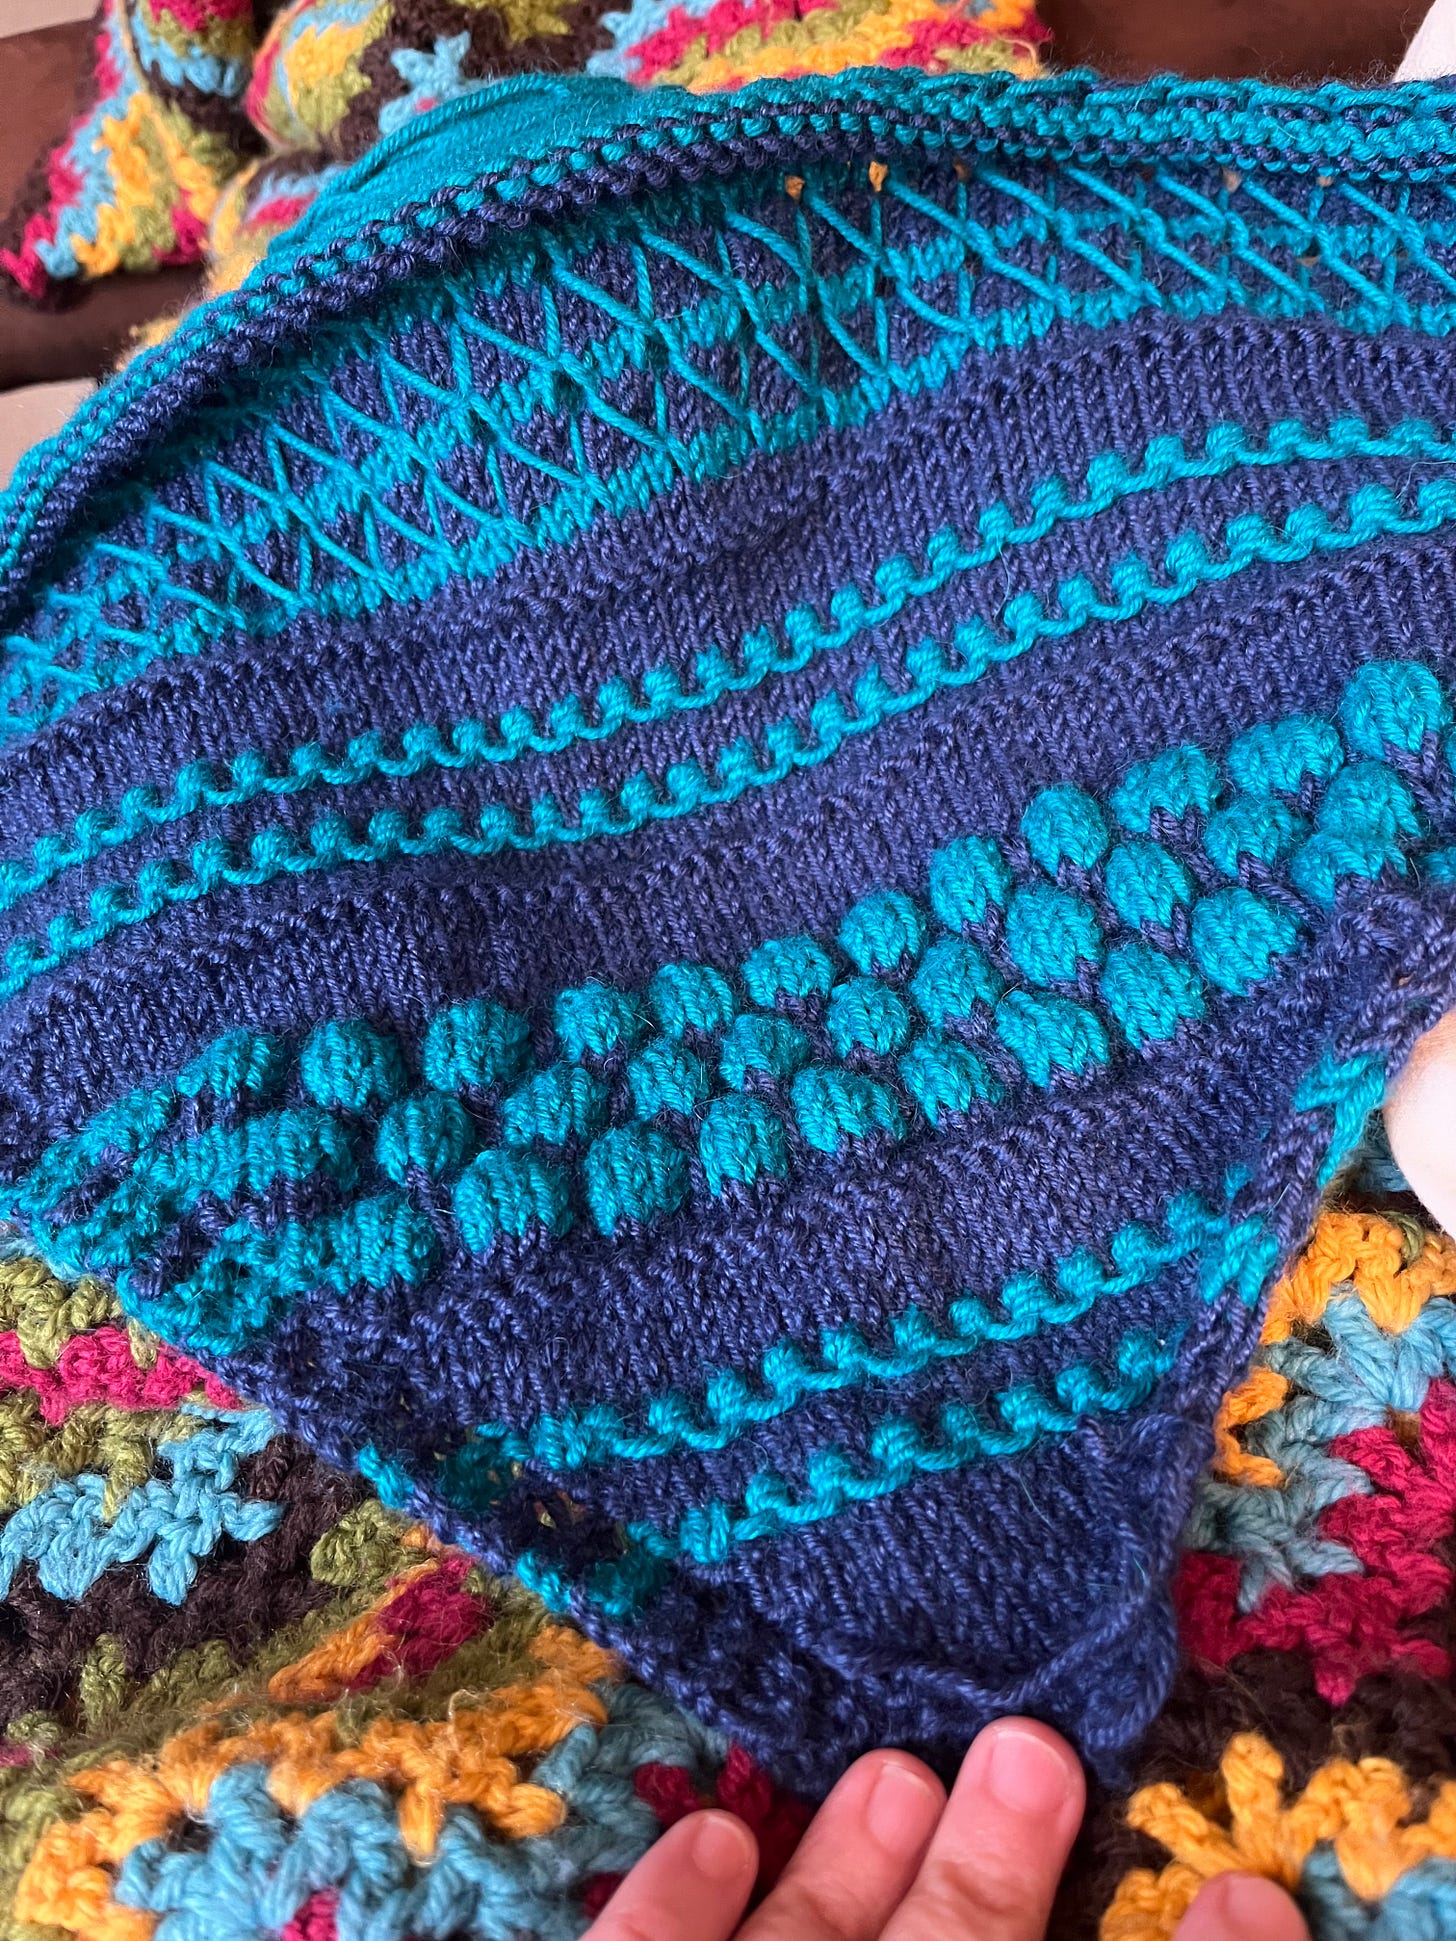 A hand holds down the corner of an item knitted on the bias - it has alternating bands of smooth stockinette stitch and highly-textured bubbles and elongated stitches. The background color is dark blue and the contrast color is teal, even though the obnoxiously bright blanket being used as a backdrop doesn't make it look that way.